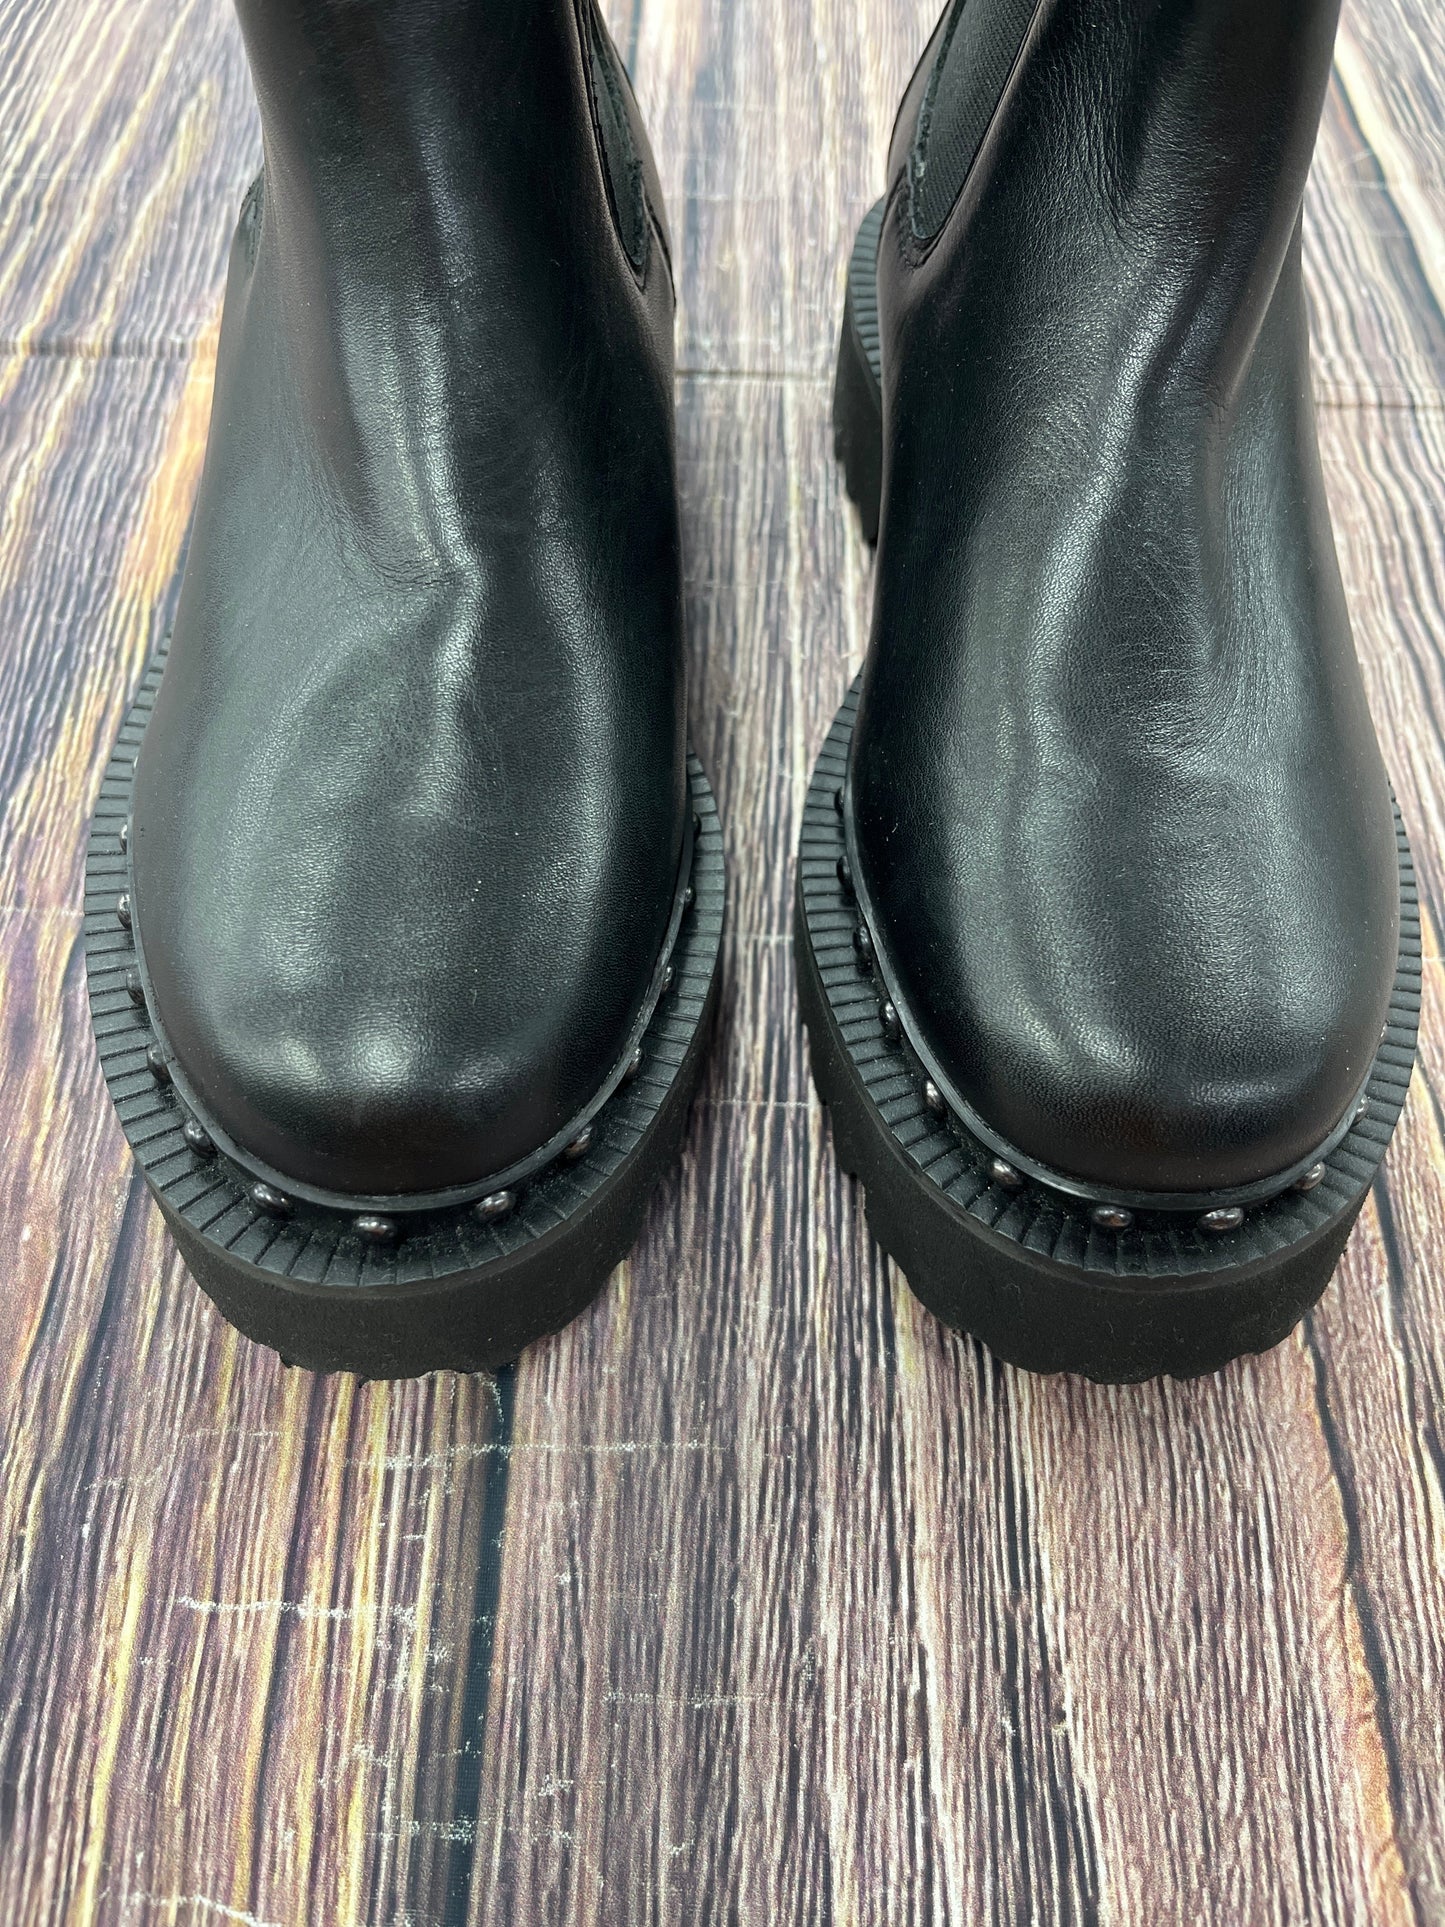 Boots Ankle Flats By Vince Camuto  Size: 5.5